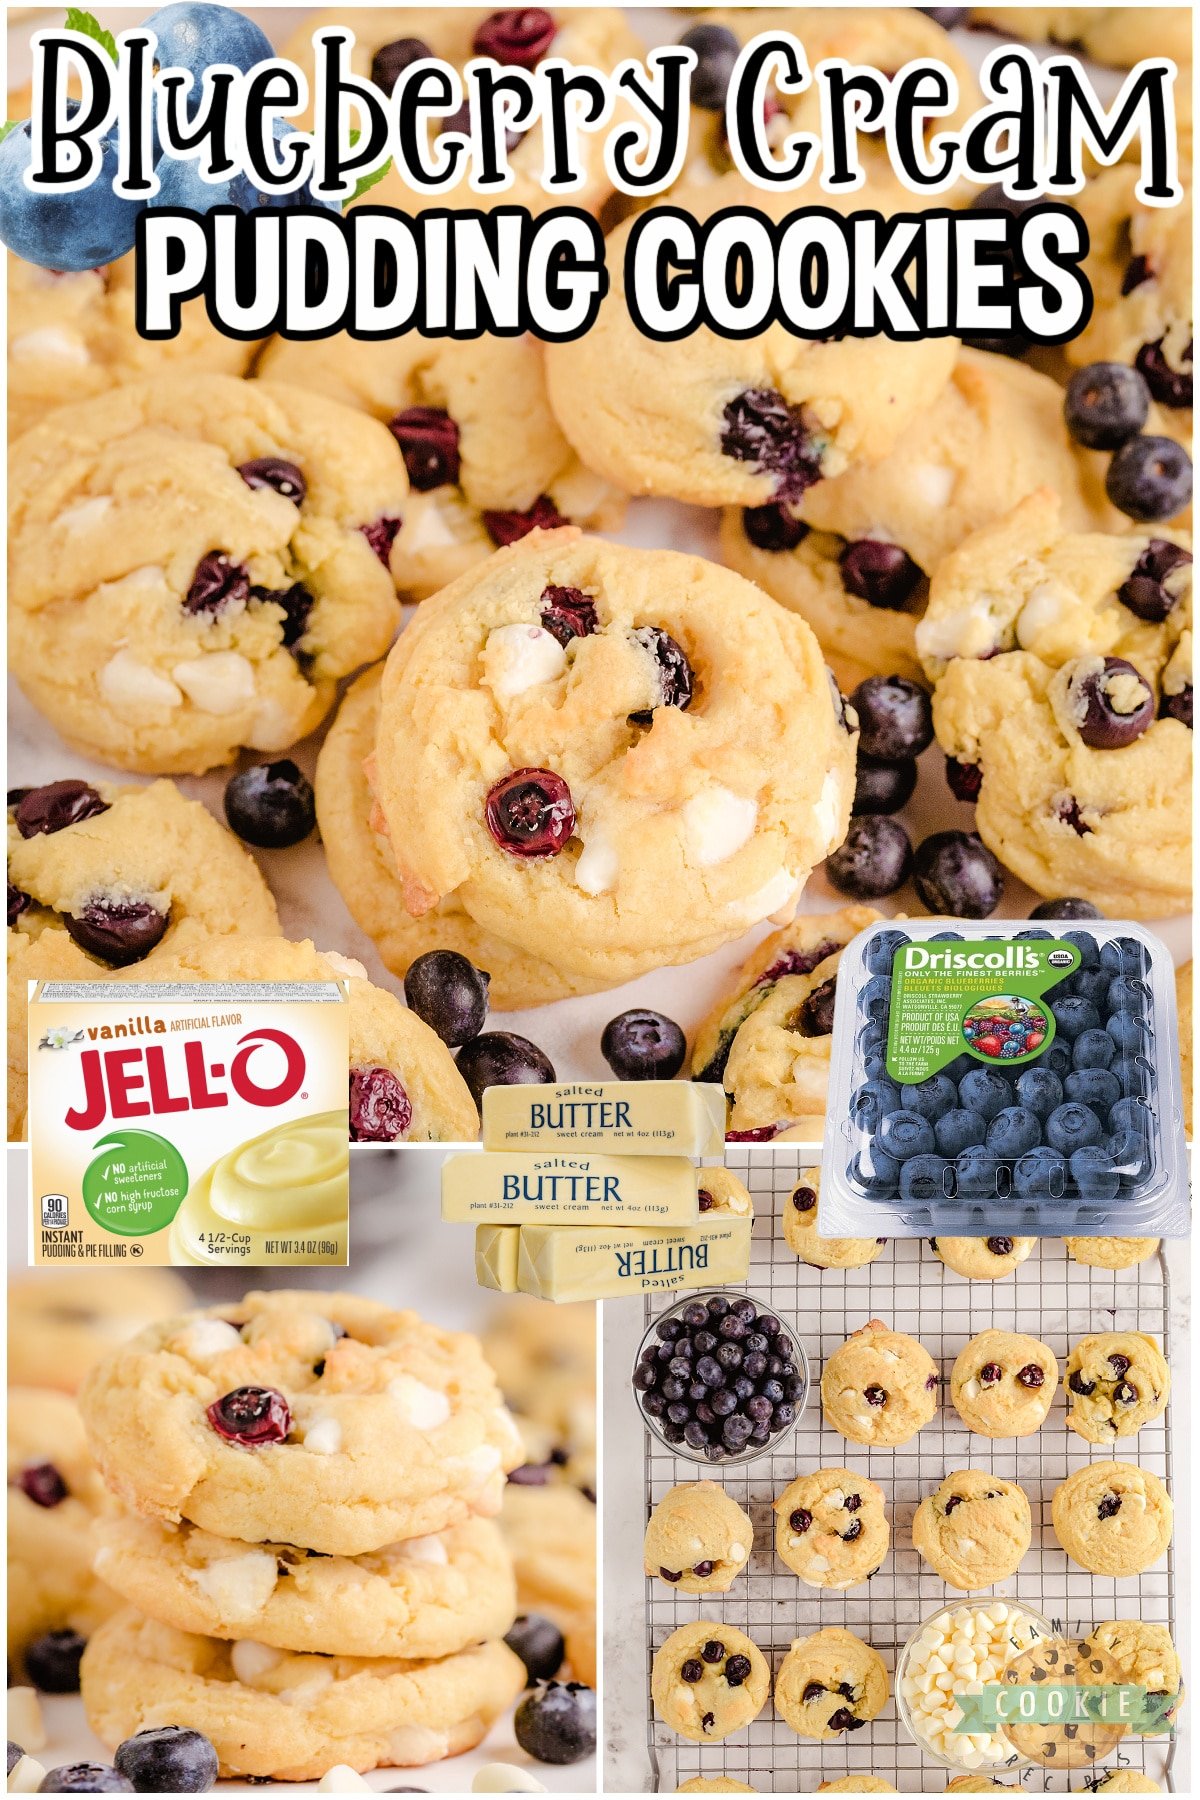 Blueberry Cream Cookies are soft vanilla pudding cookies with fantastic blueberry flavor! White chocolate chips + fresh blueberries are baked right into these amazing cookies.